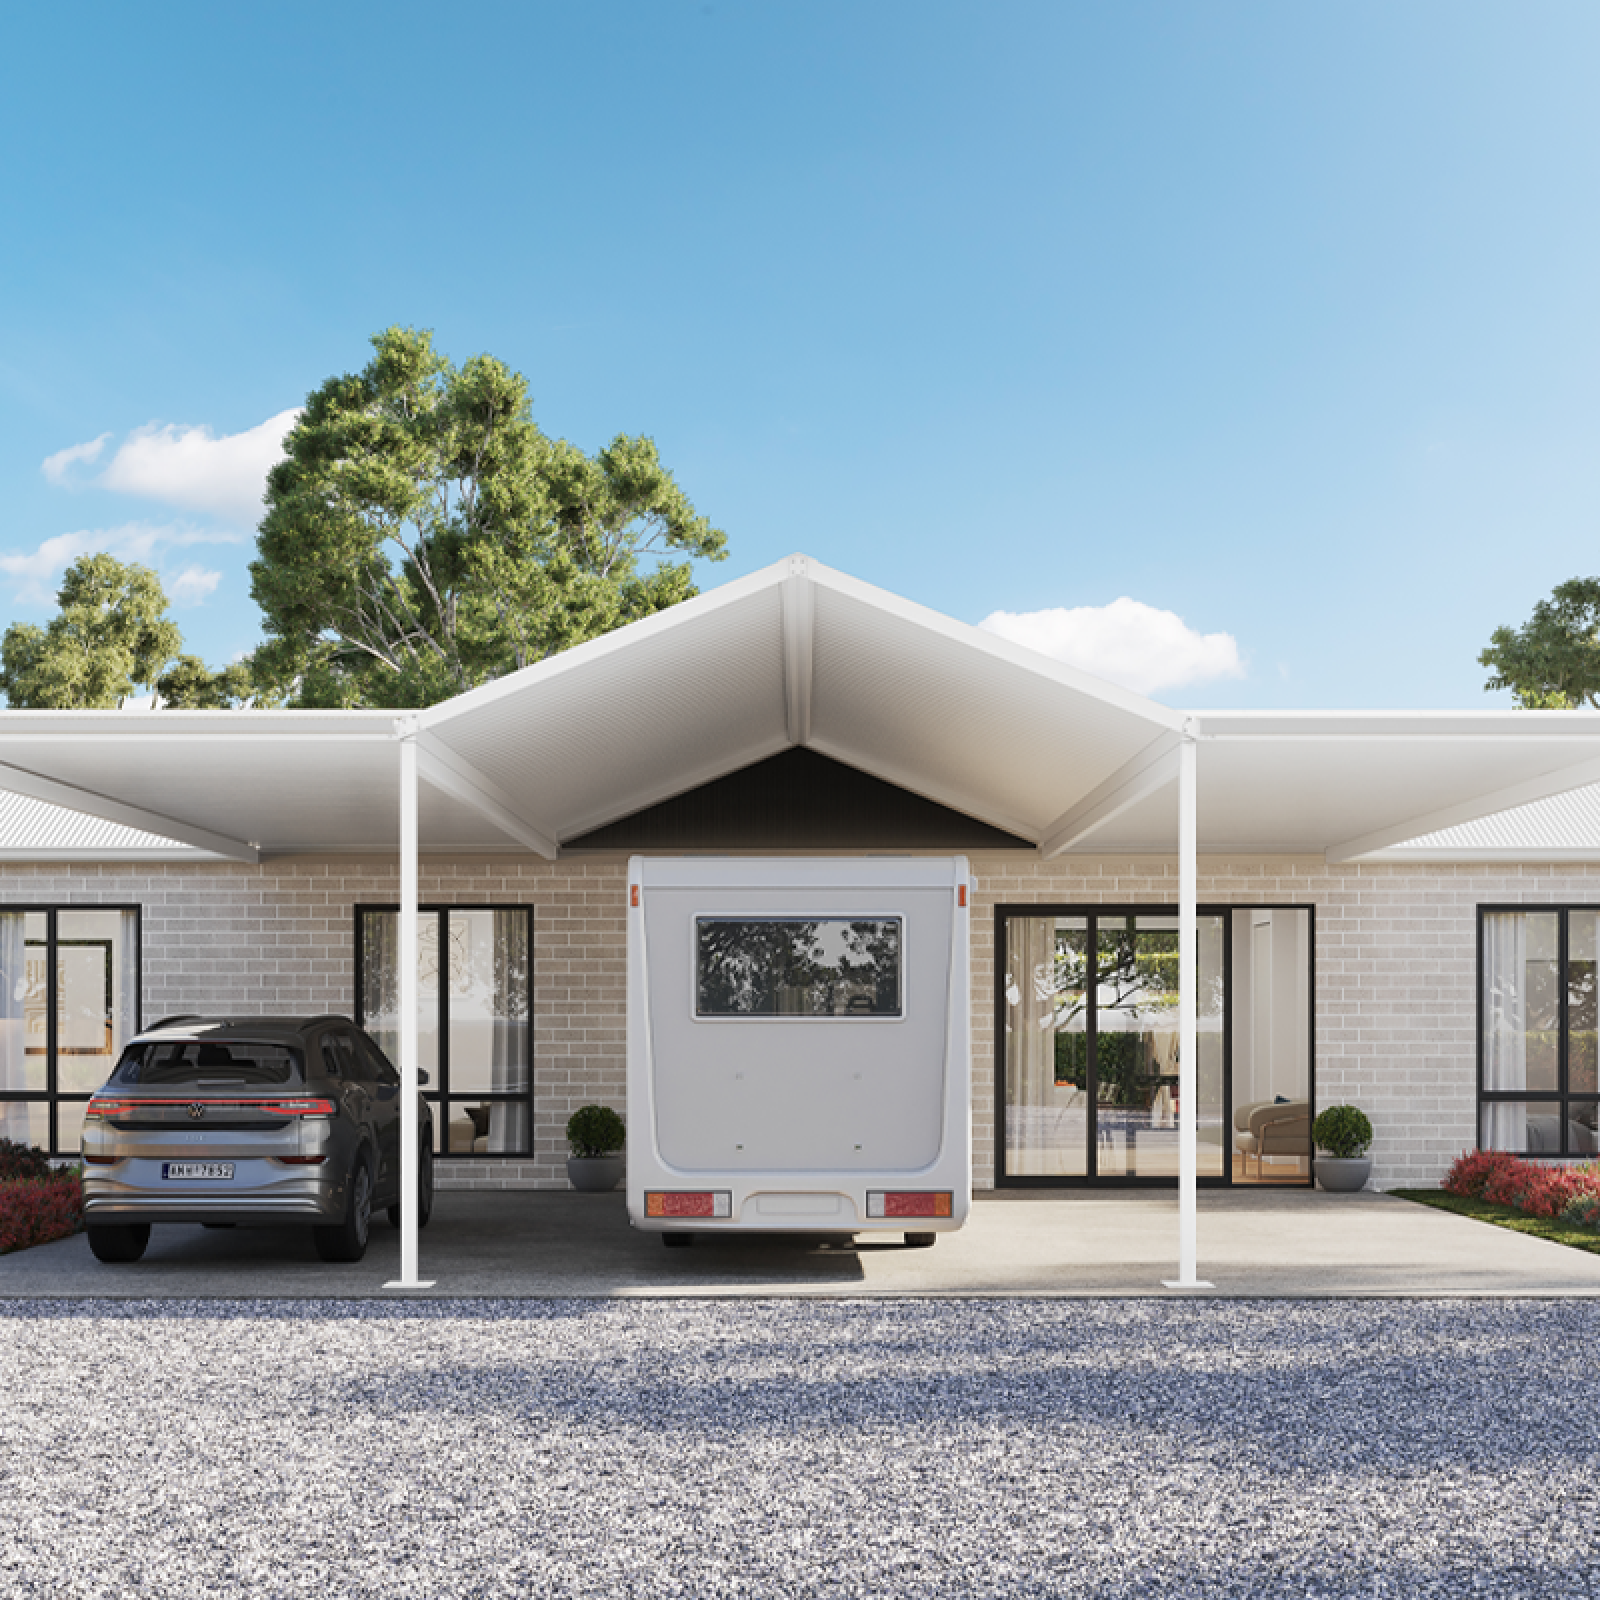 https://www.stramitoutdoor.com.au/assets/Product-Pages/Gallery-Product-Page/Carports/Product-mainbanner-combination-carport-800x800px__FocusFillWyIwLjAwIiwiMC4wMCIsMTYwMCwxNjAwXQ.png